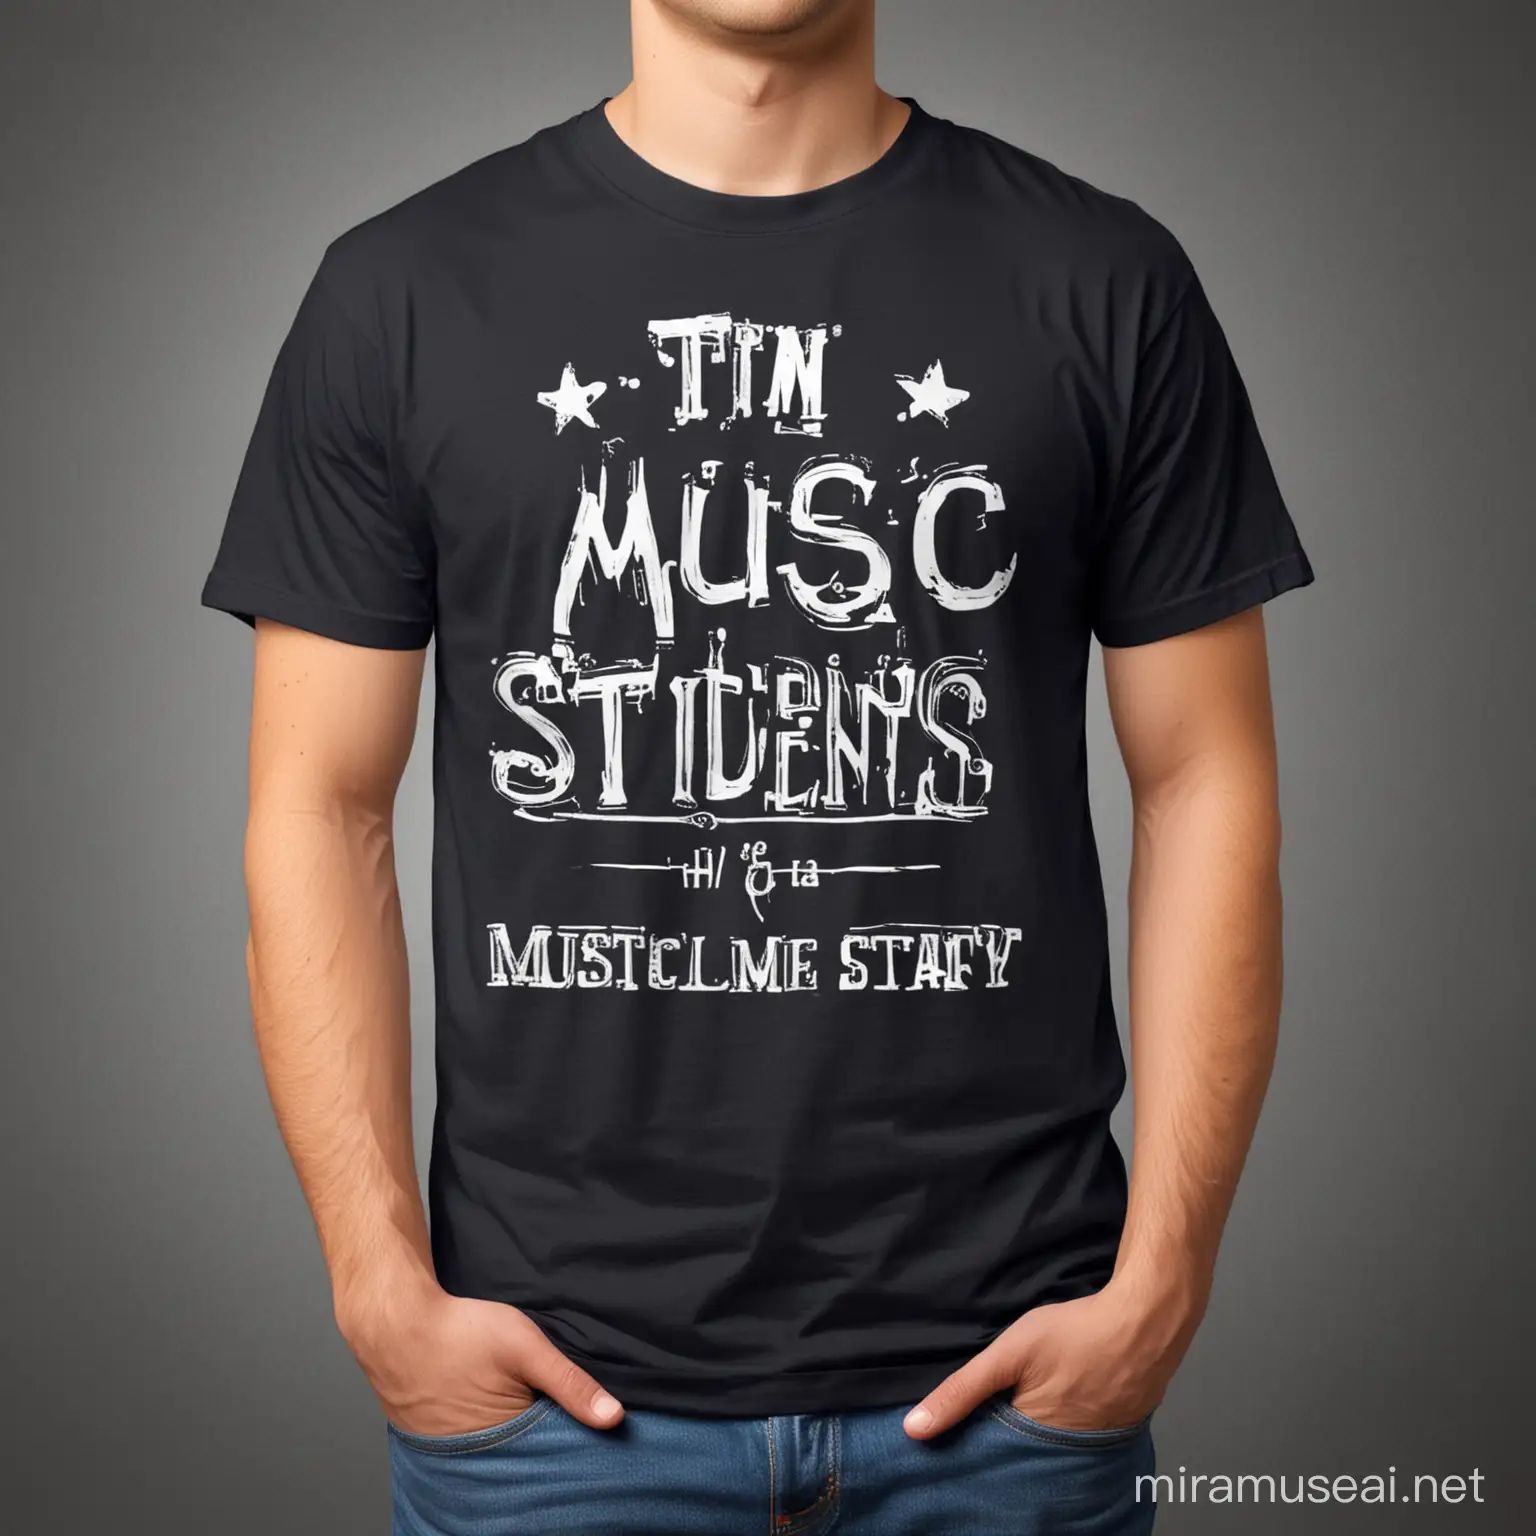 A college t-shirt that symbolise I'm a Music student